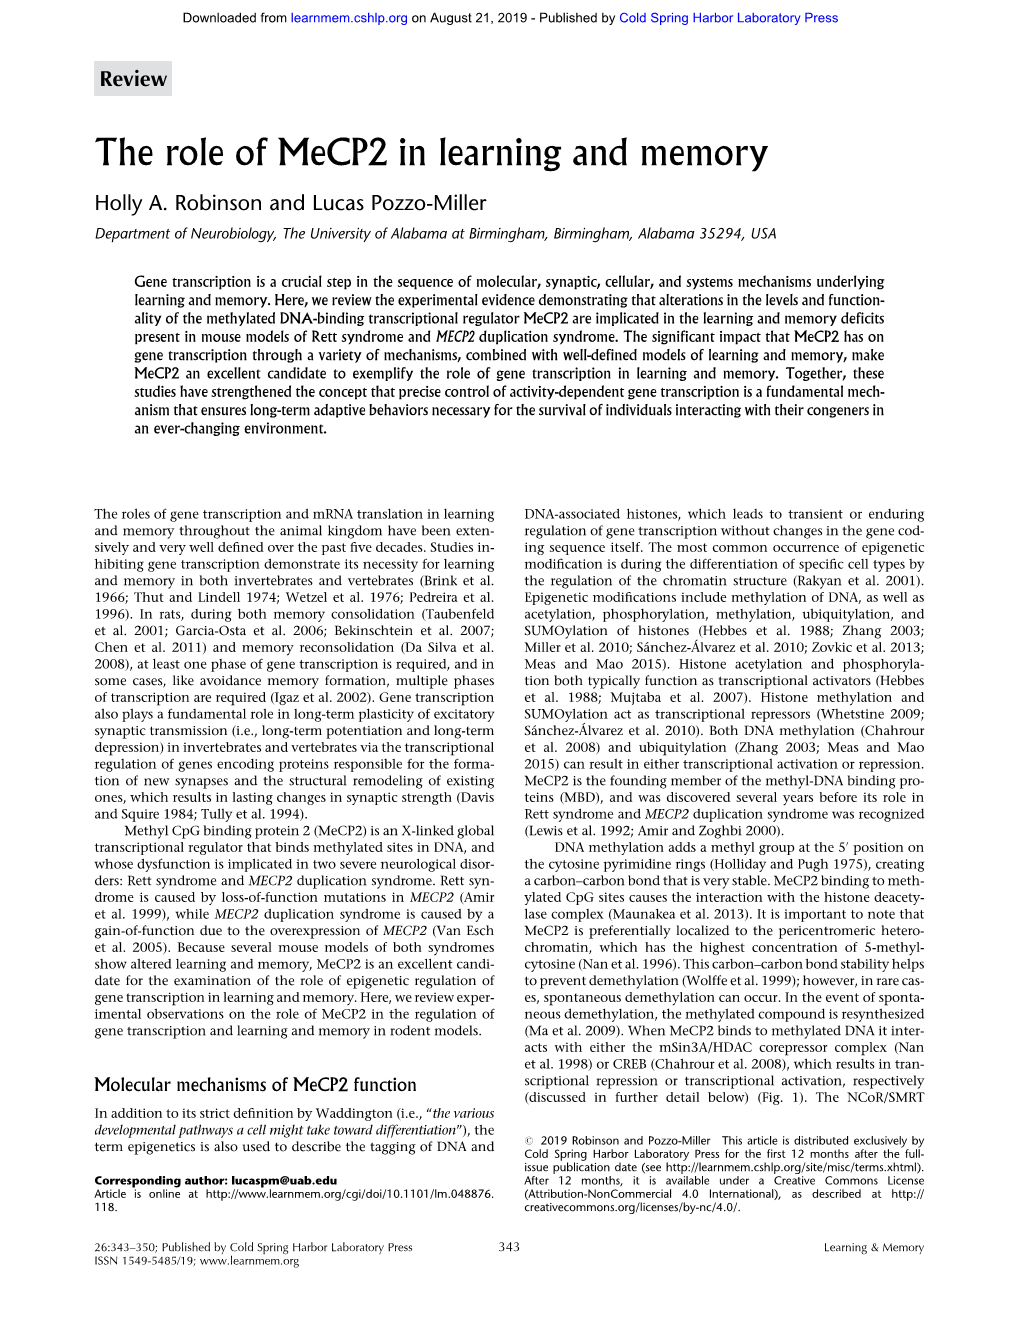 The Role of Mecp2 in Learning and Memory